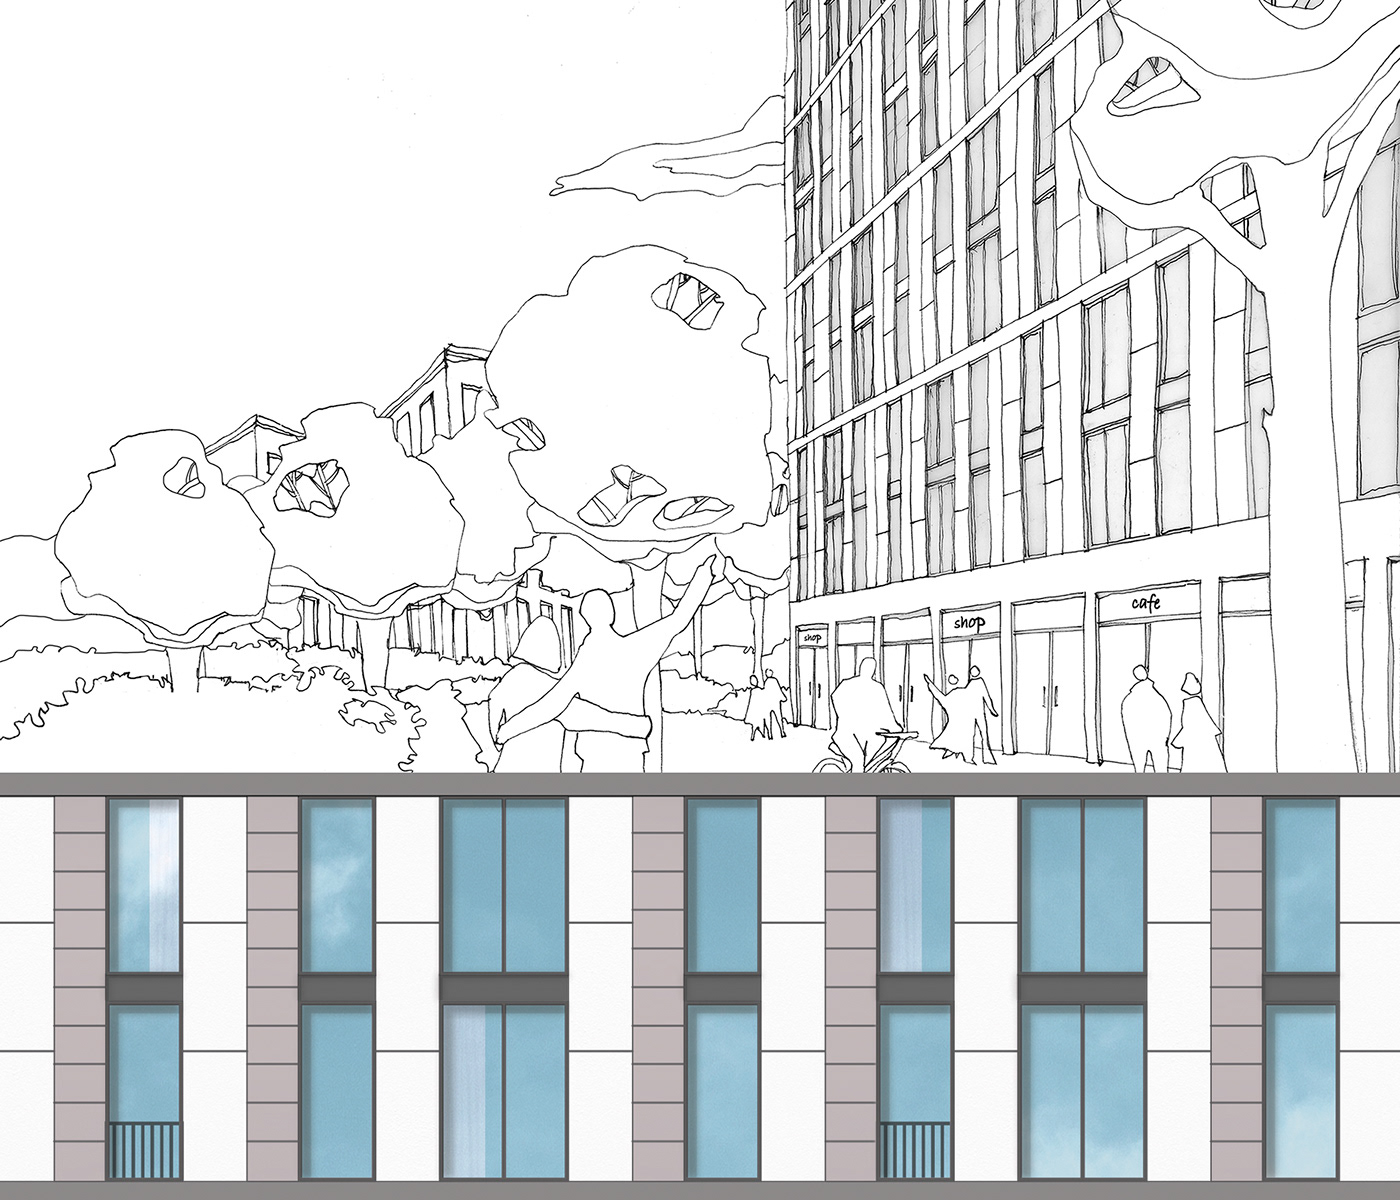 Apartament hotel architecture design Drawing  Project sketch